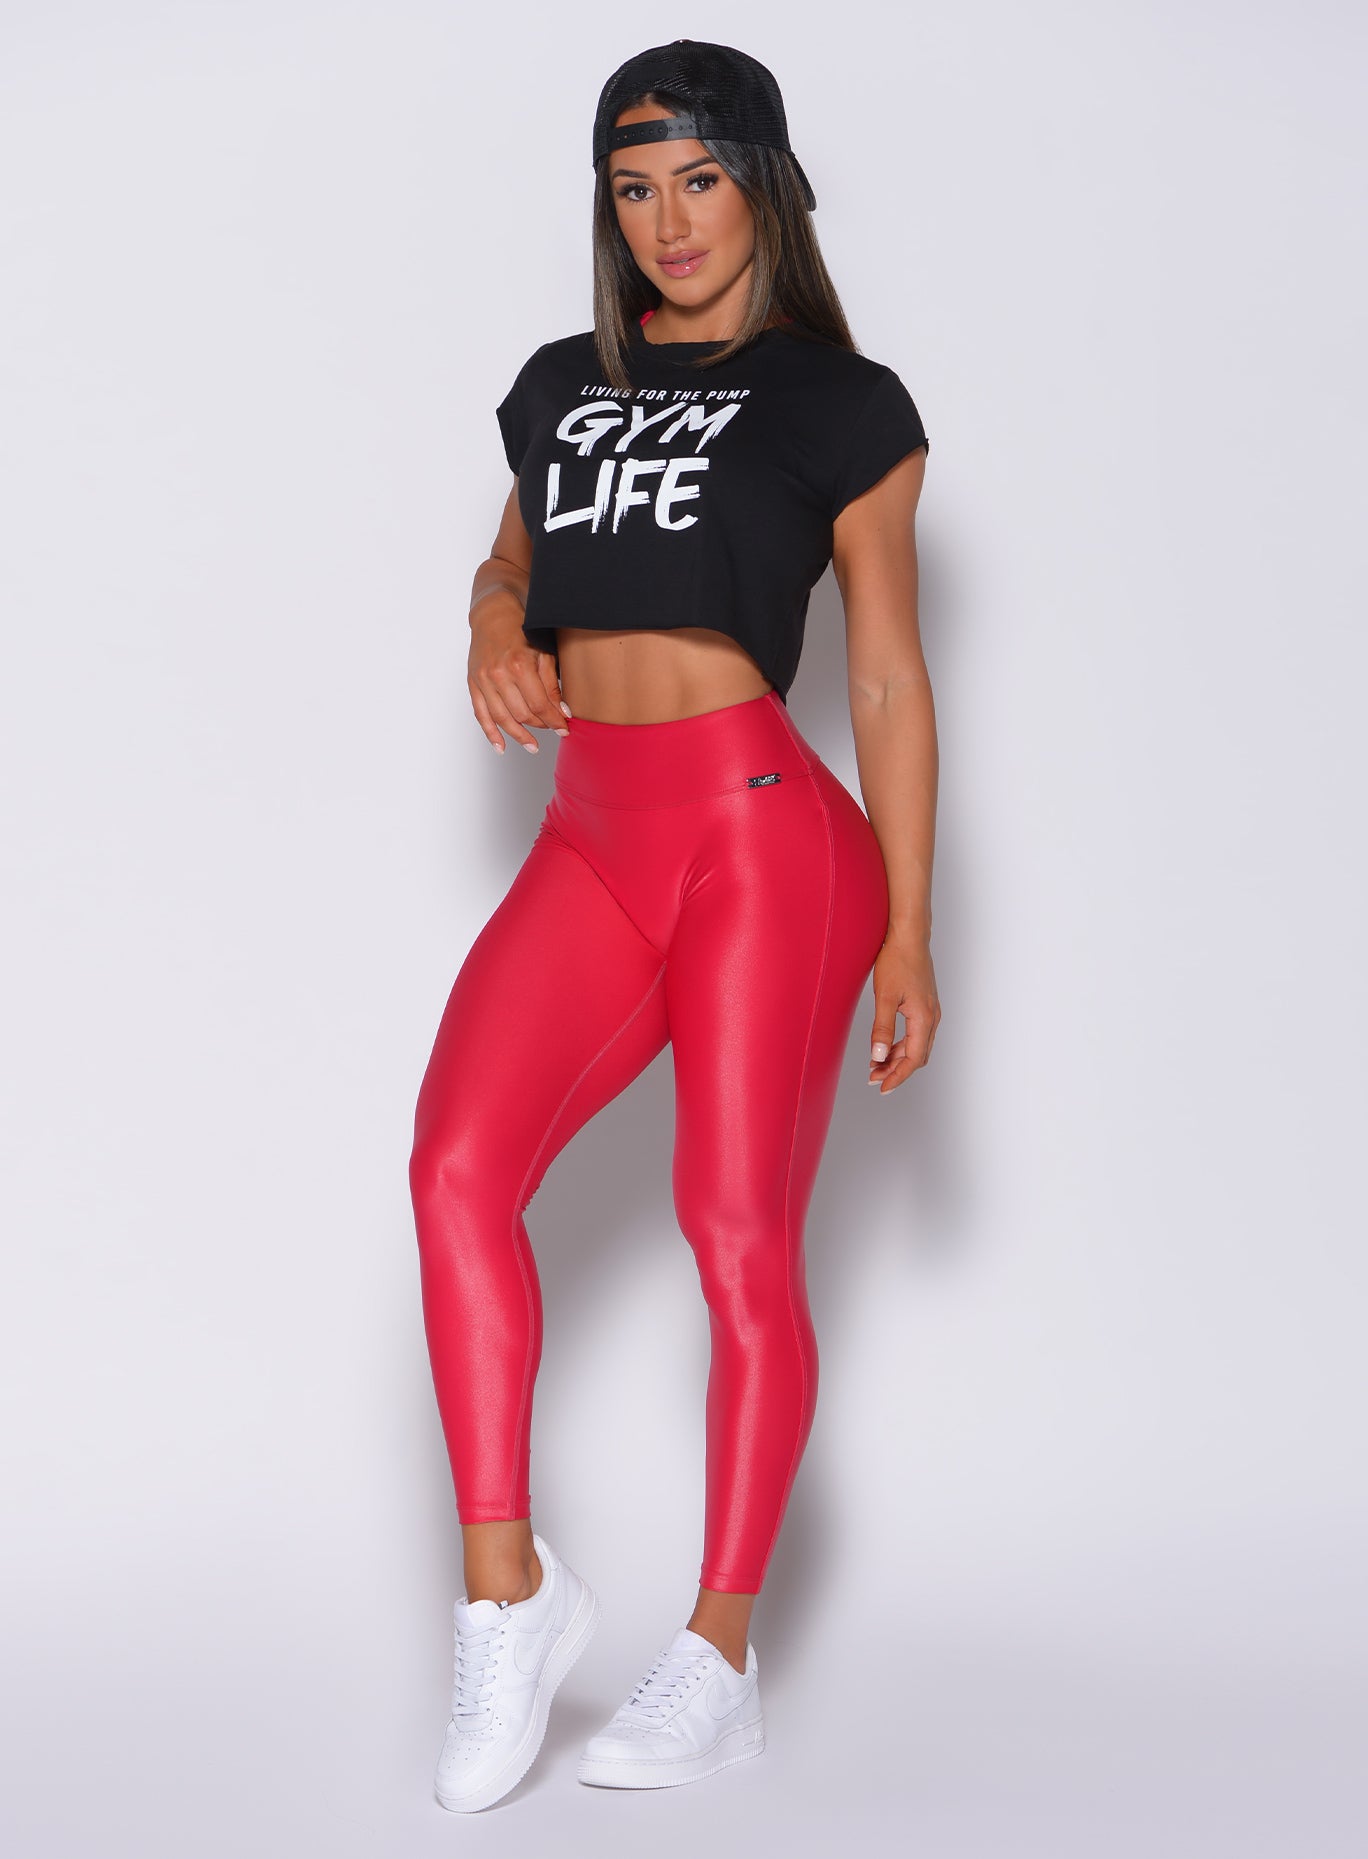 Why every women should own a pair of seamless leggings